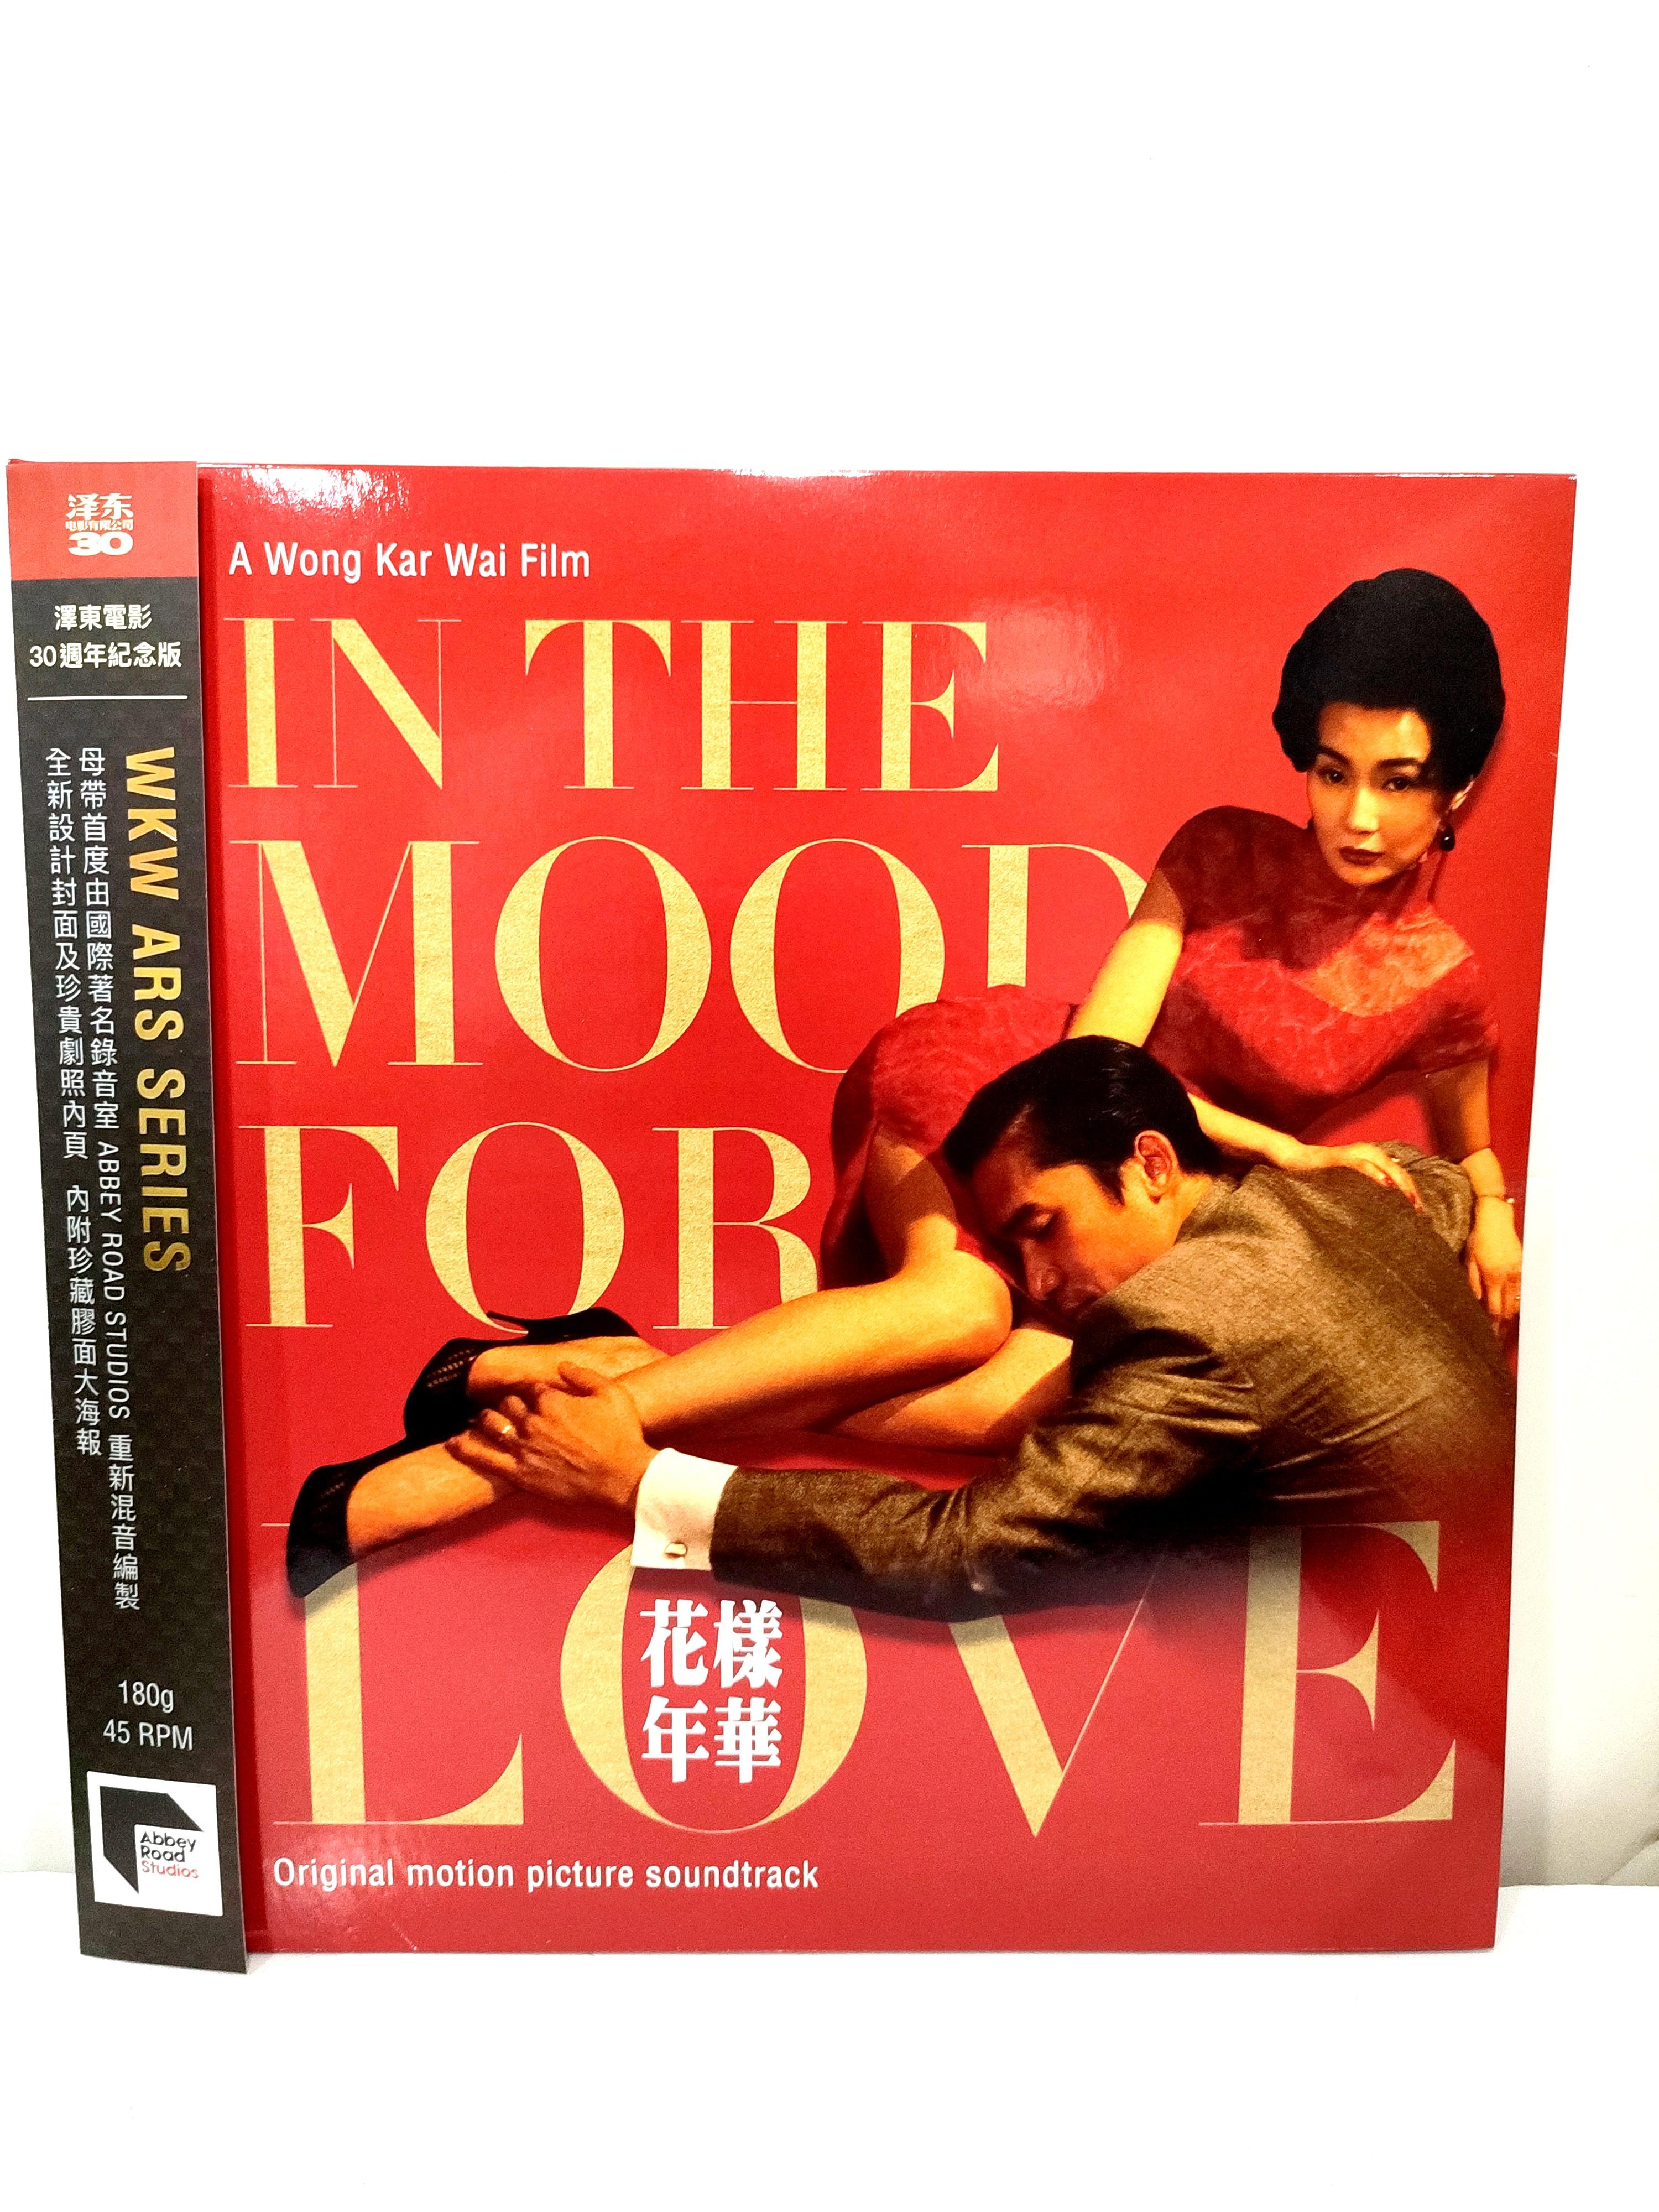 In The Mood For Love 花様年華 レコード 再発 - レコード